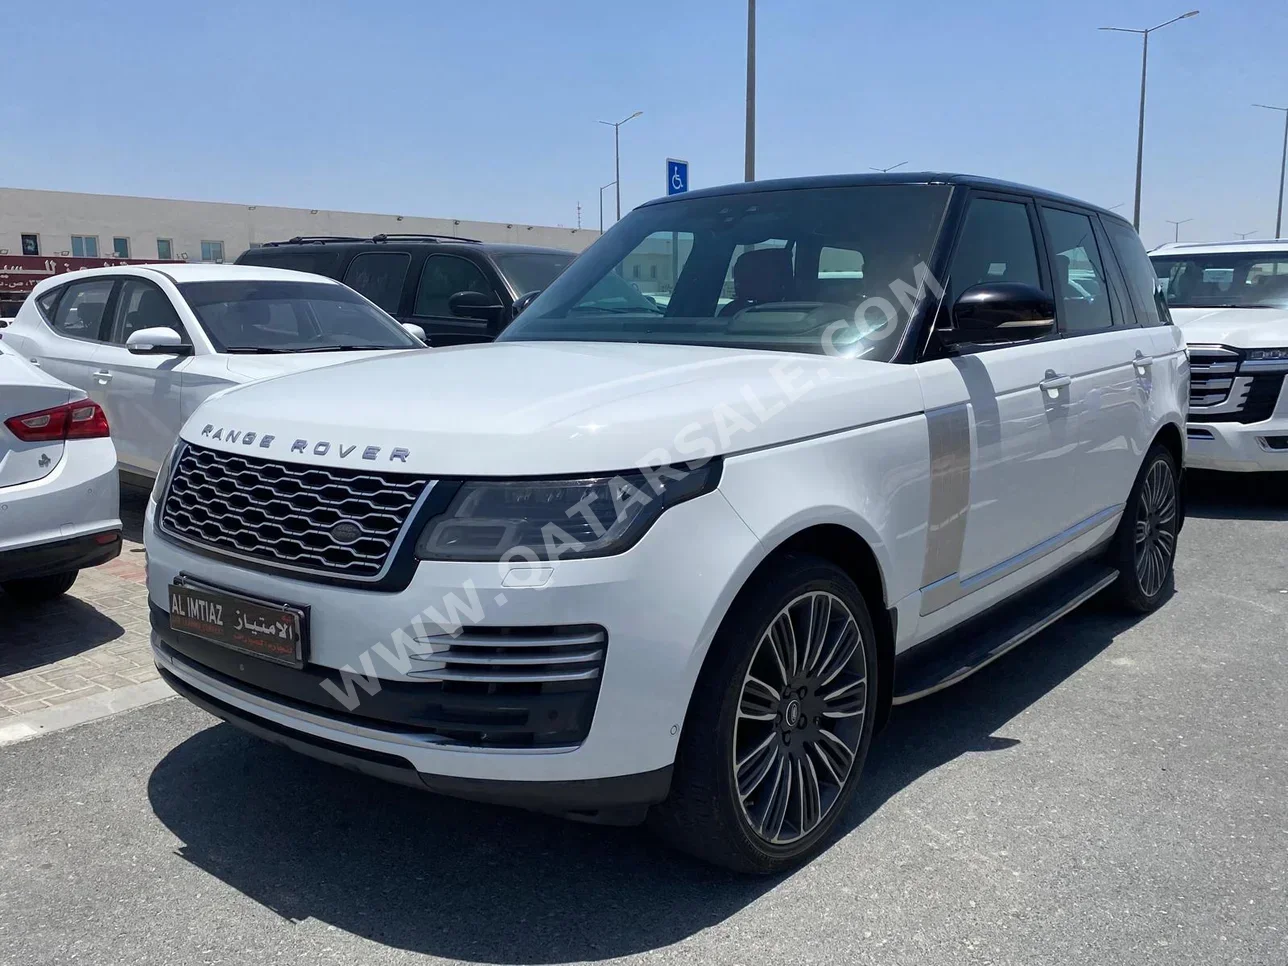 Land Rover  Range Rover  Vogue  Autobiography  2018  Automatic  69,000 Km  8 Cylinder  Four Wheel Drive (4WD)  SUV  White